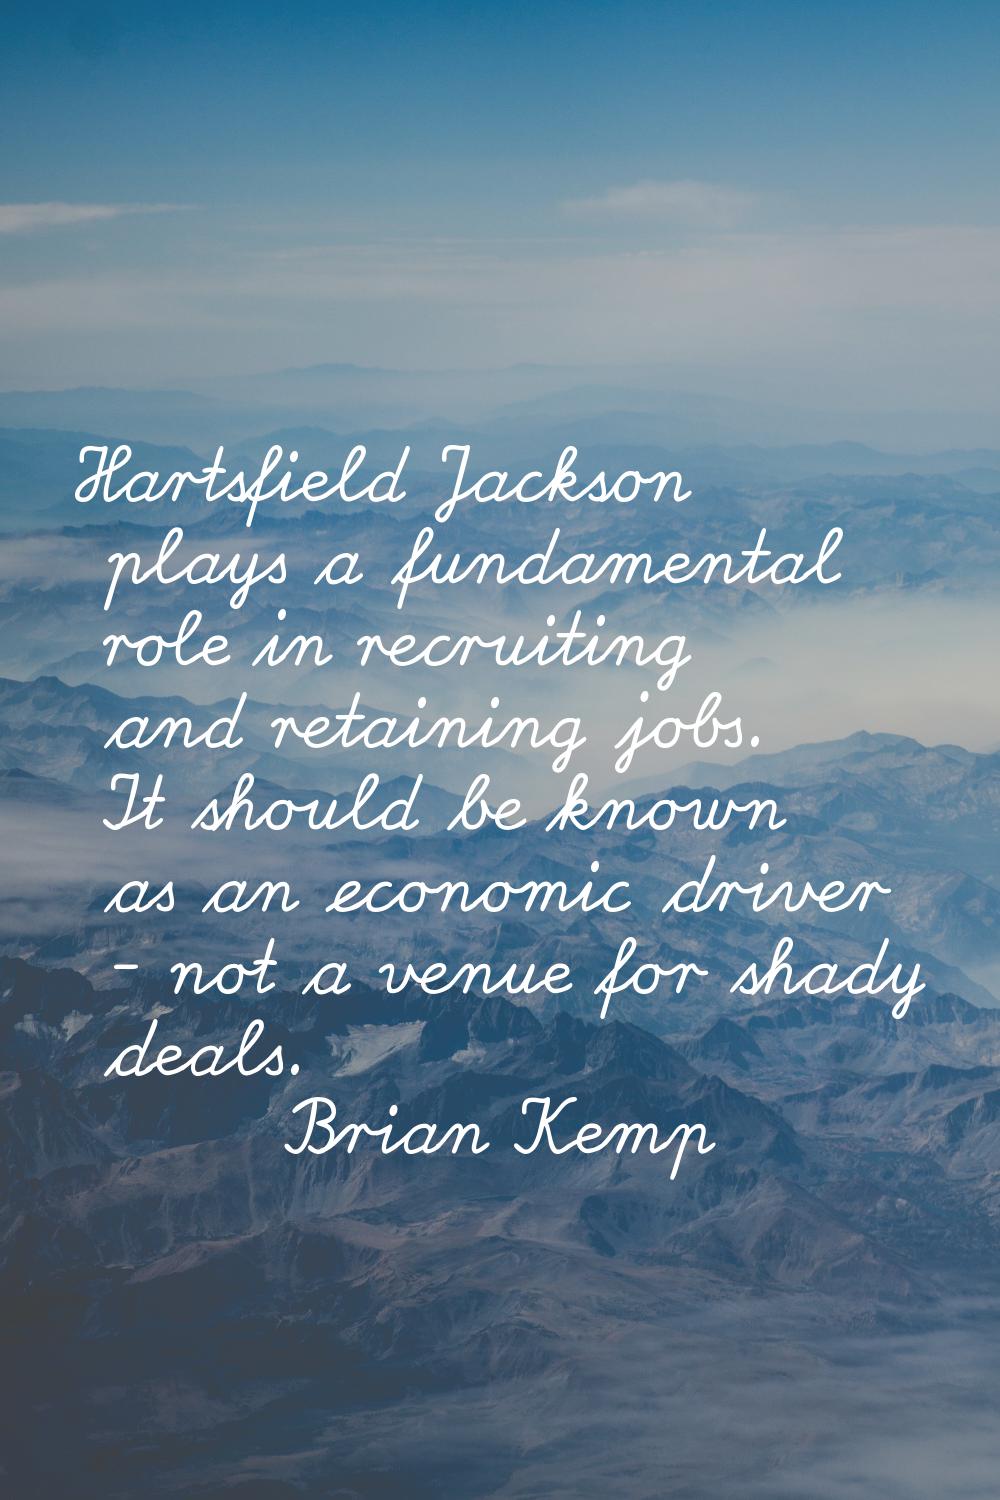 Hartsfield Jackson plays a fundamental role in recruiting and retaining jobs. It should be known as